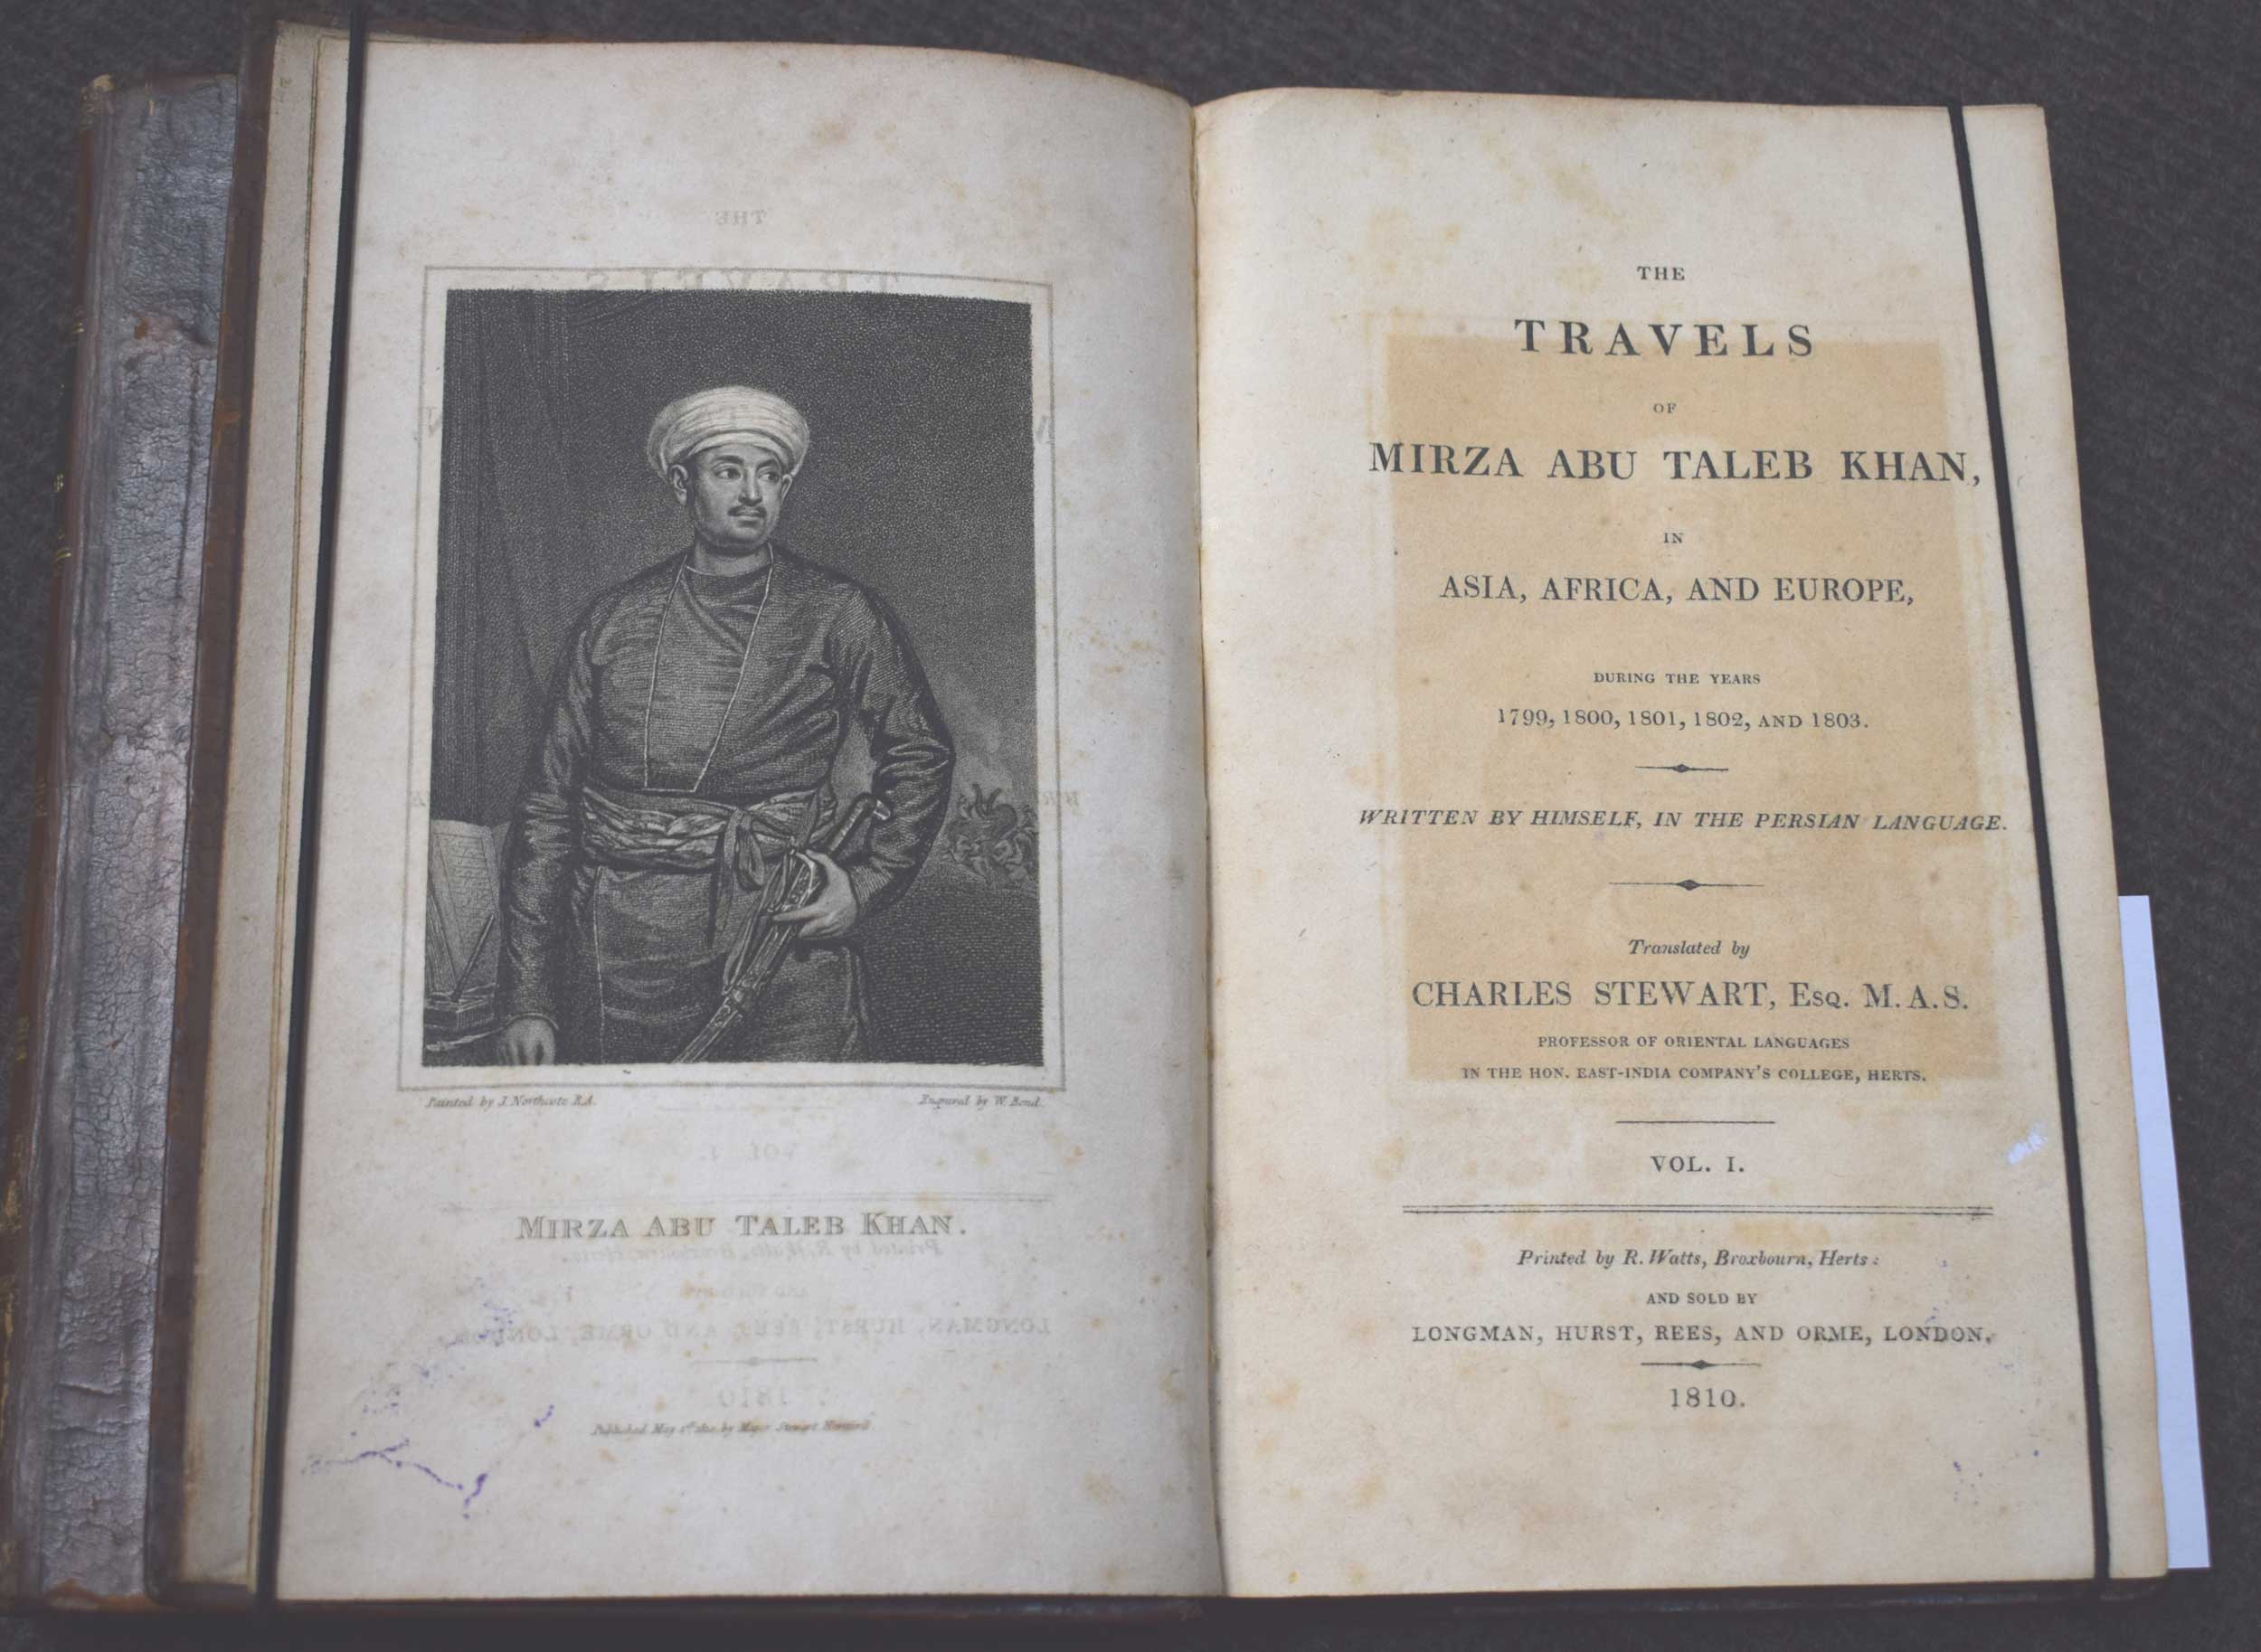 The Travels of Mirza Abu Taleb Khan, in Asia, Africa, and Europe, During the Years 1799, 1800, 1801, 1802, and 1803. Written by Himself in the Persian Language. 2 volume set.